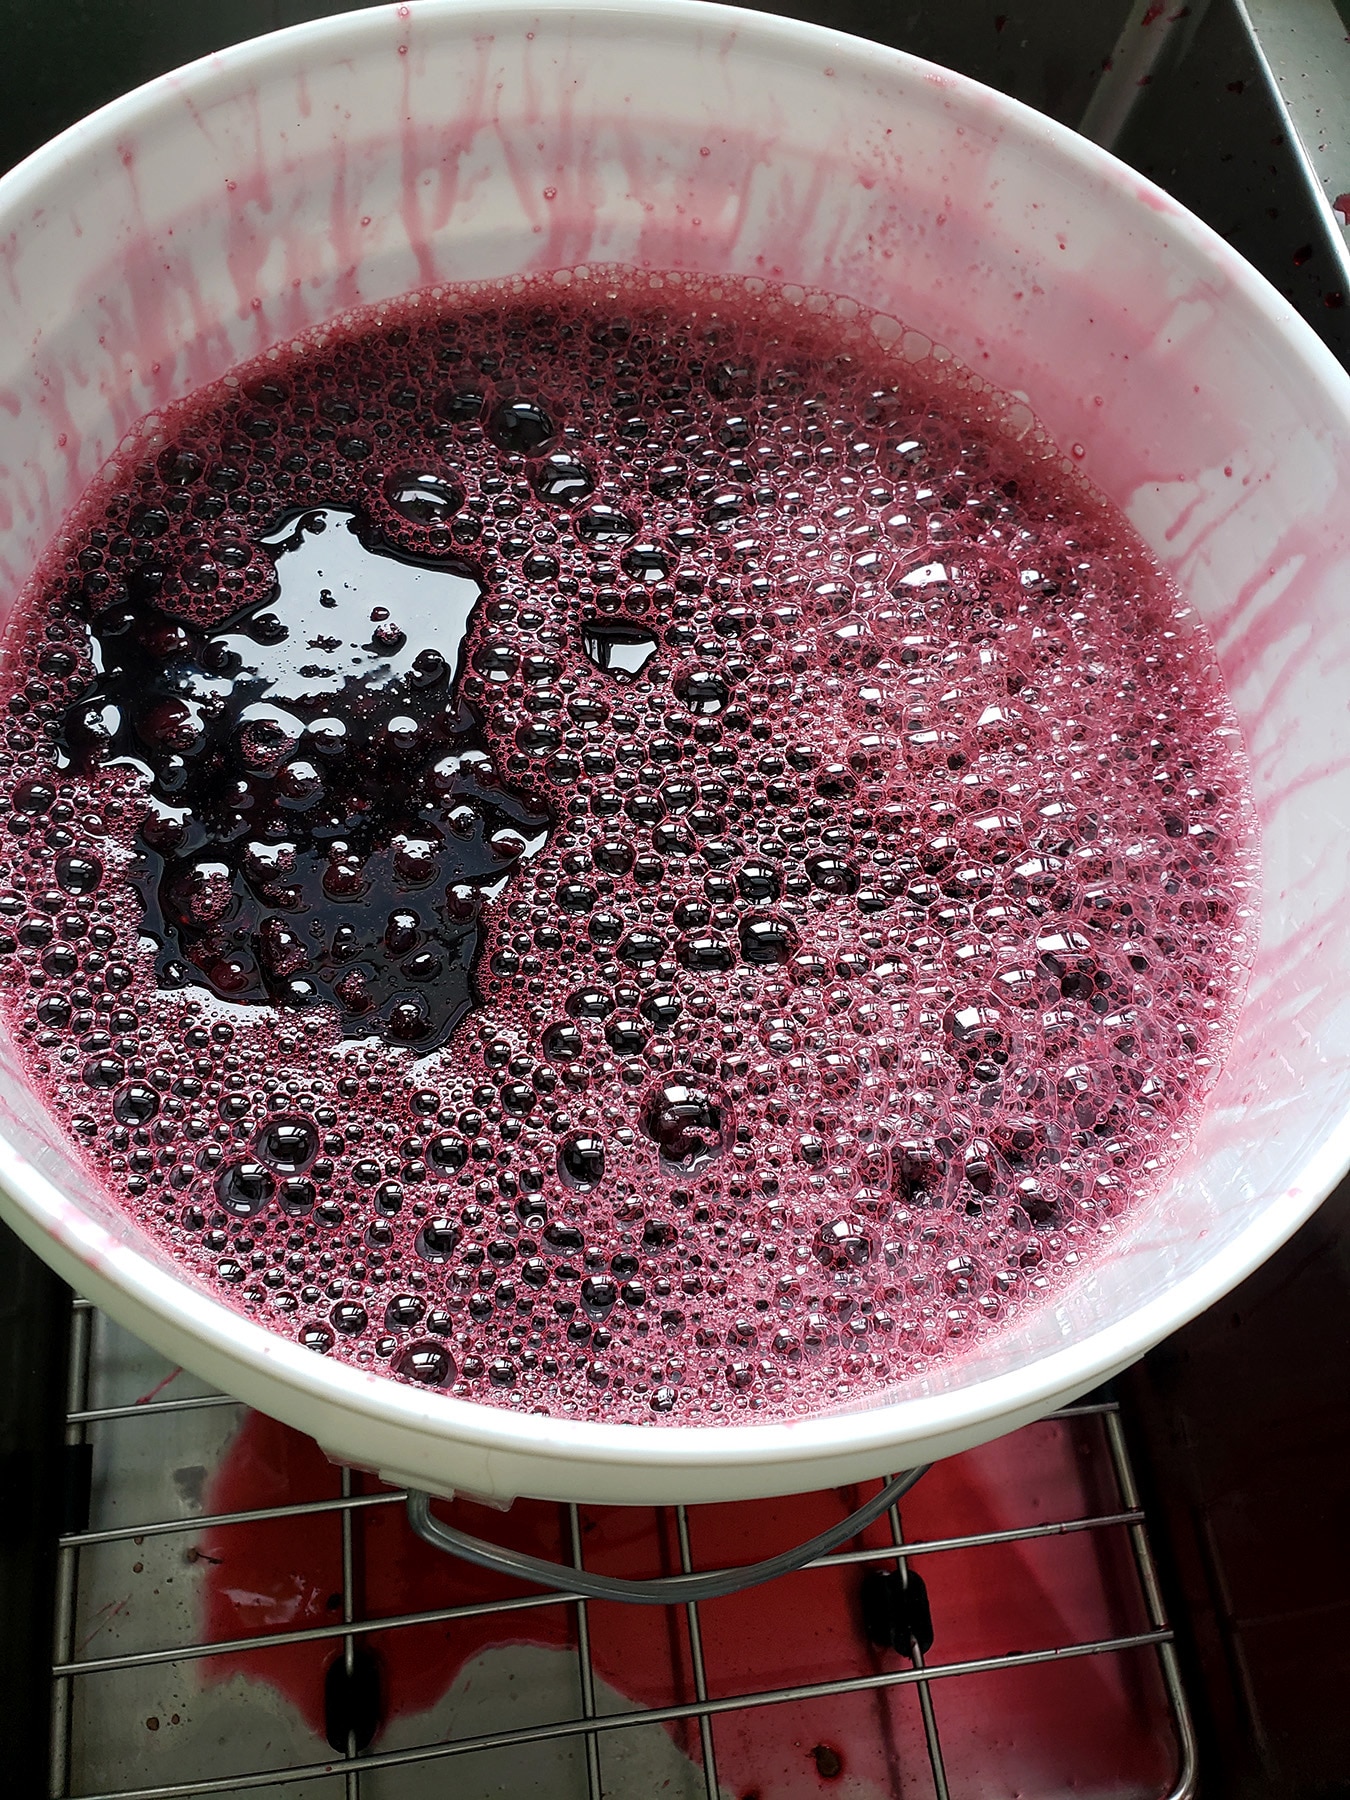 A 2 gallon white fermening bucket with blackcurrants.